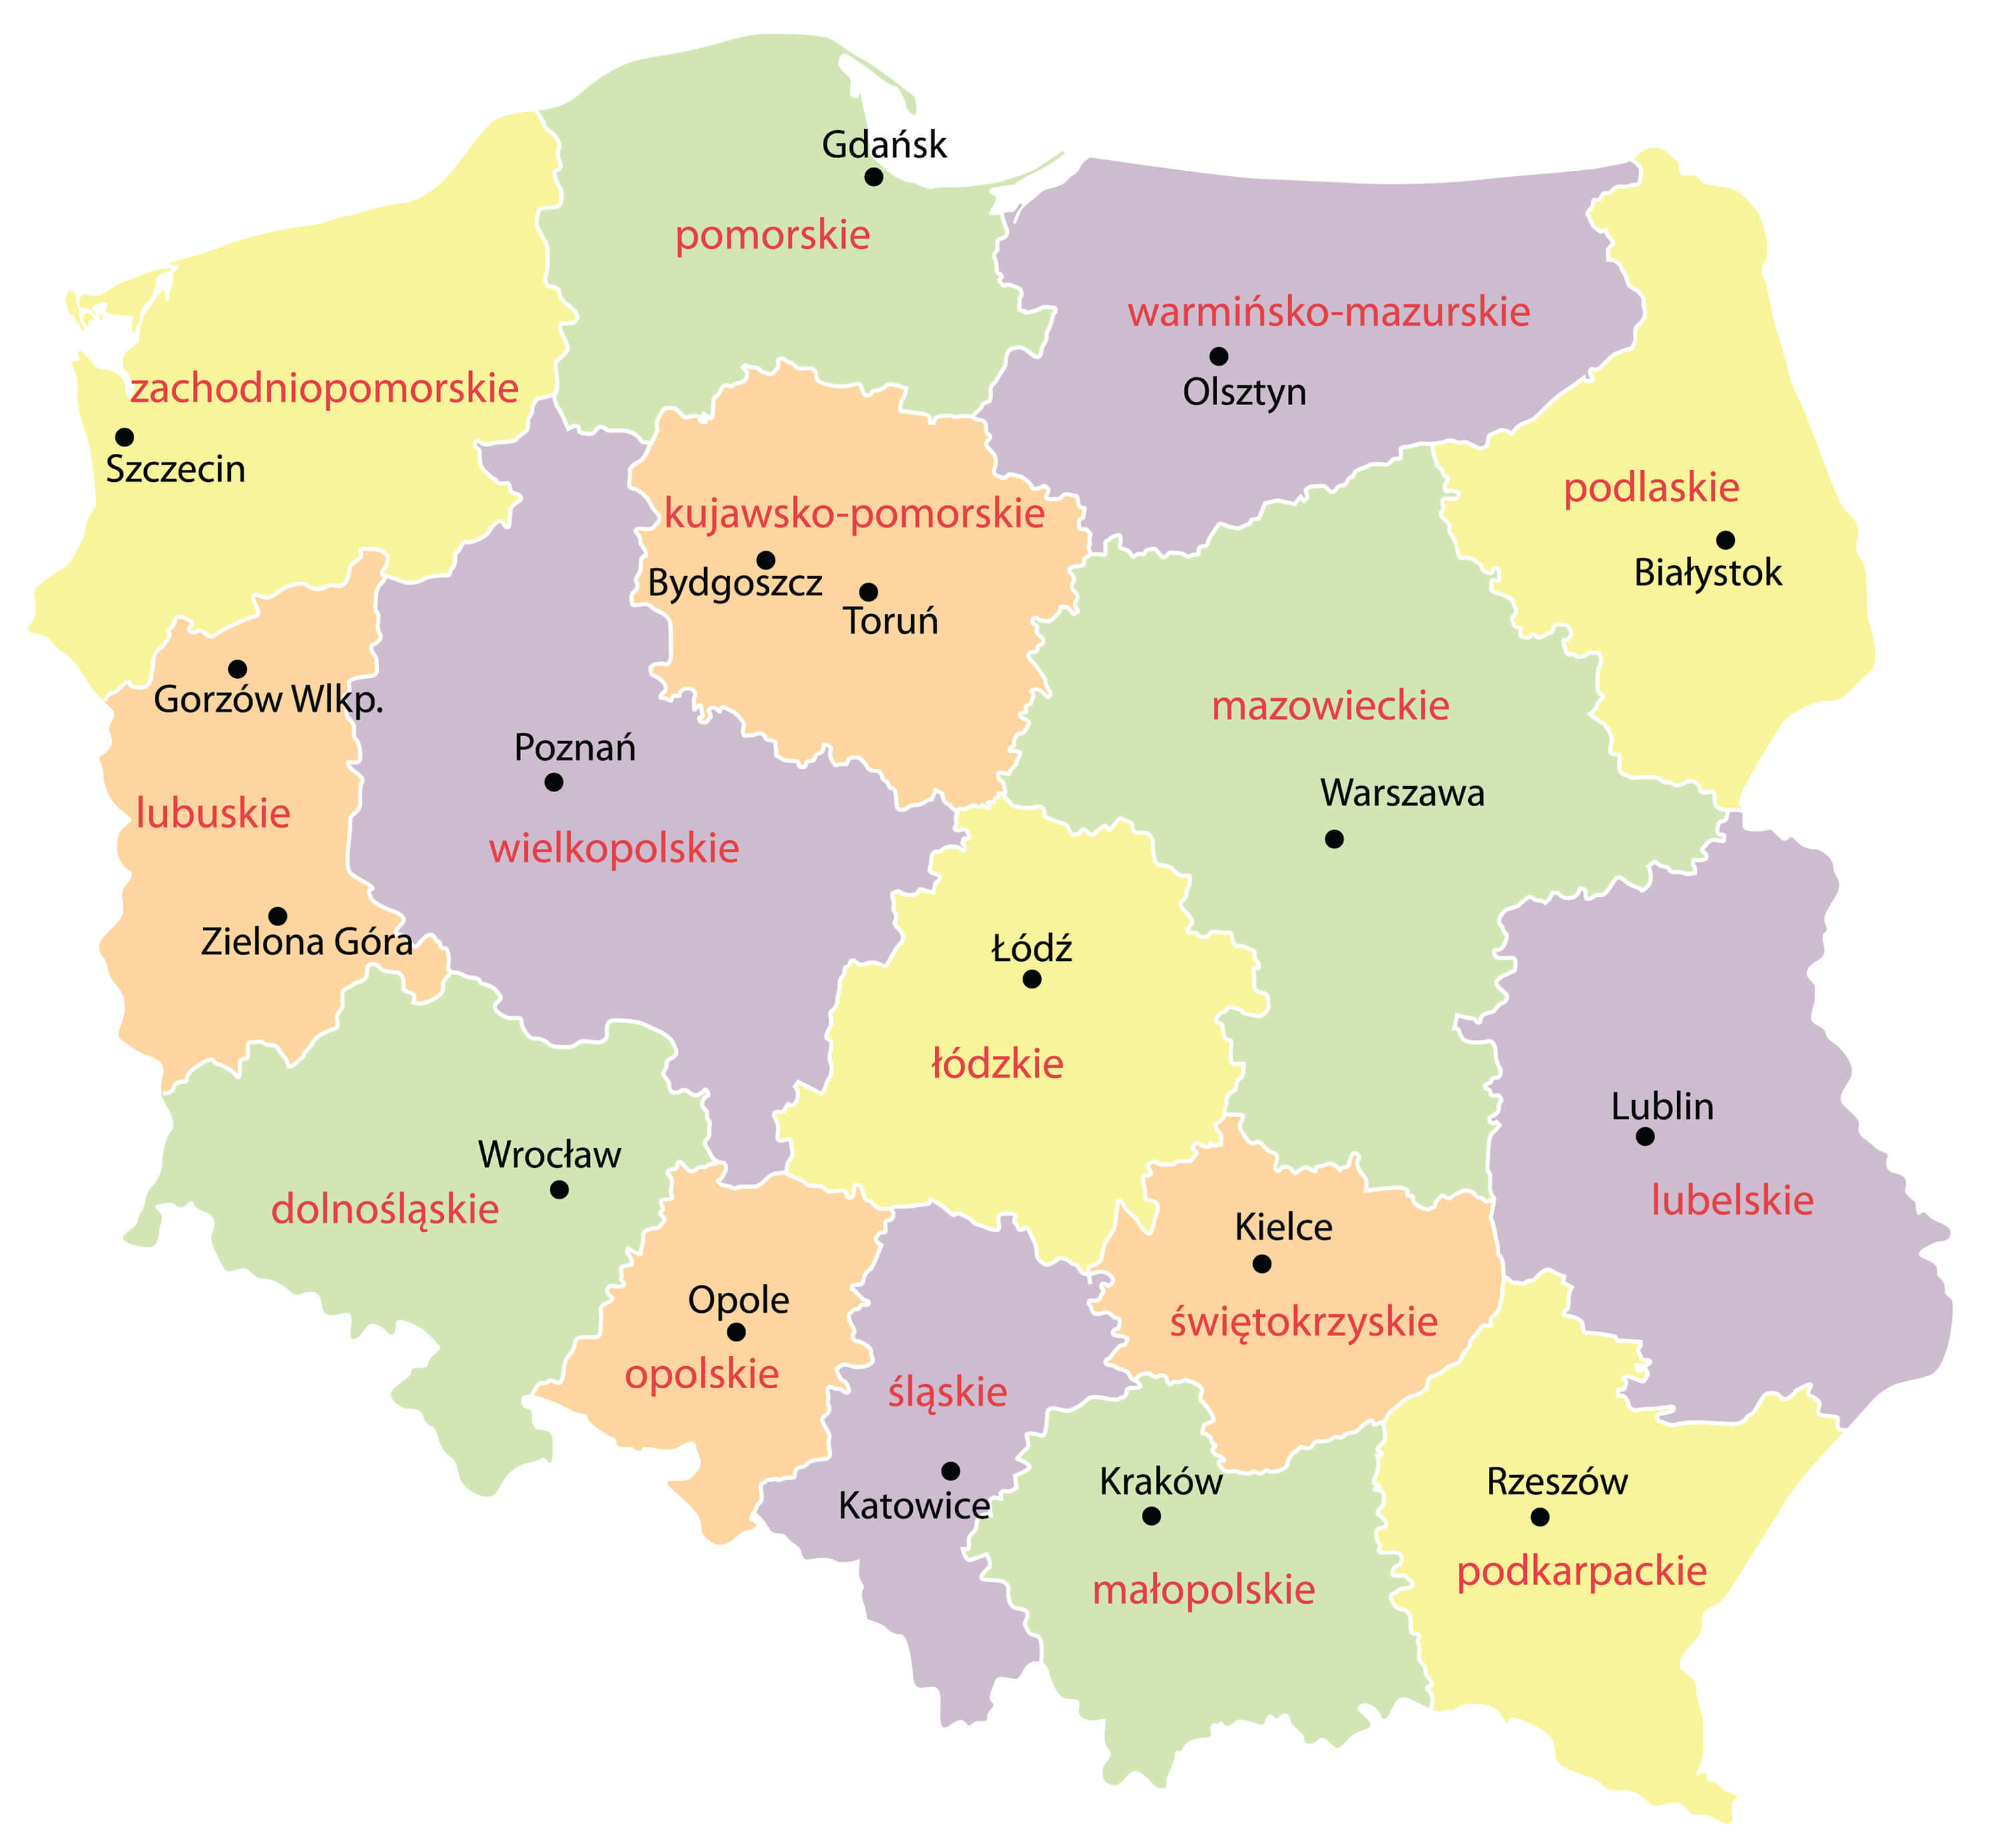 Map of Poland with Voivodships